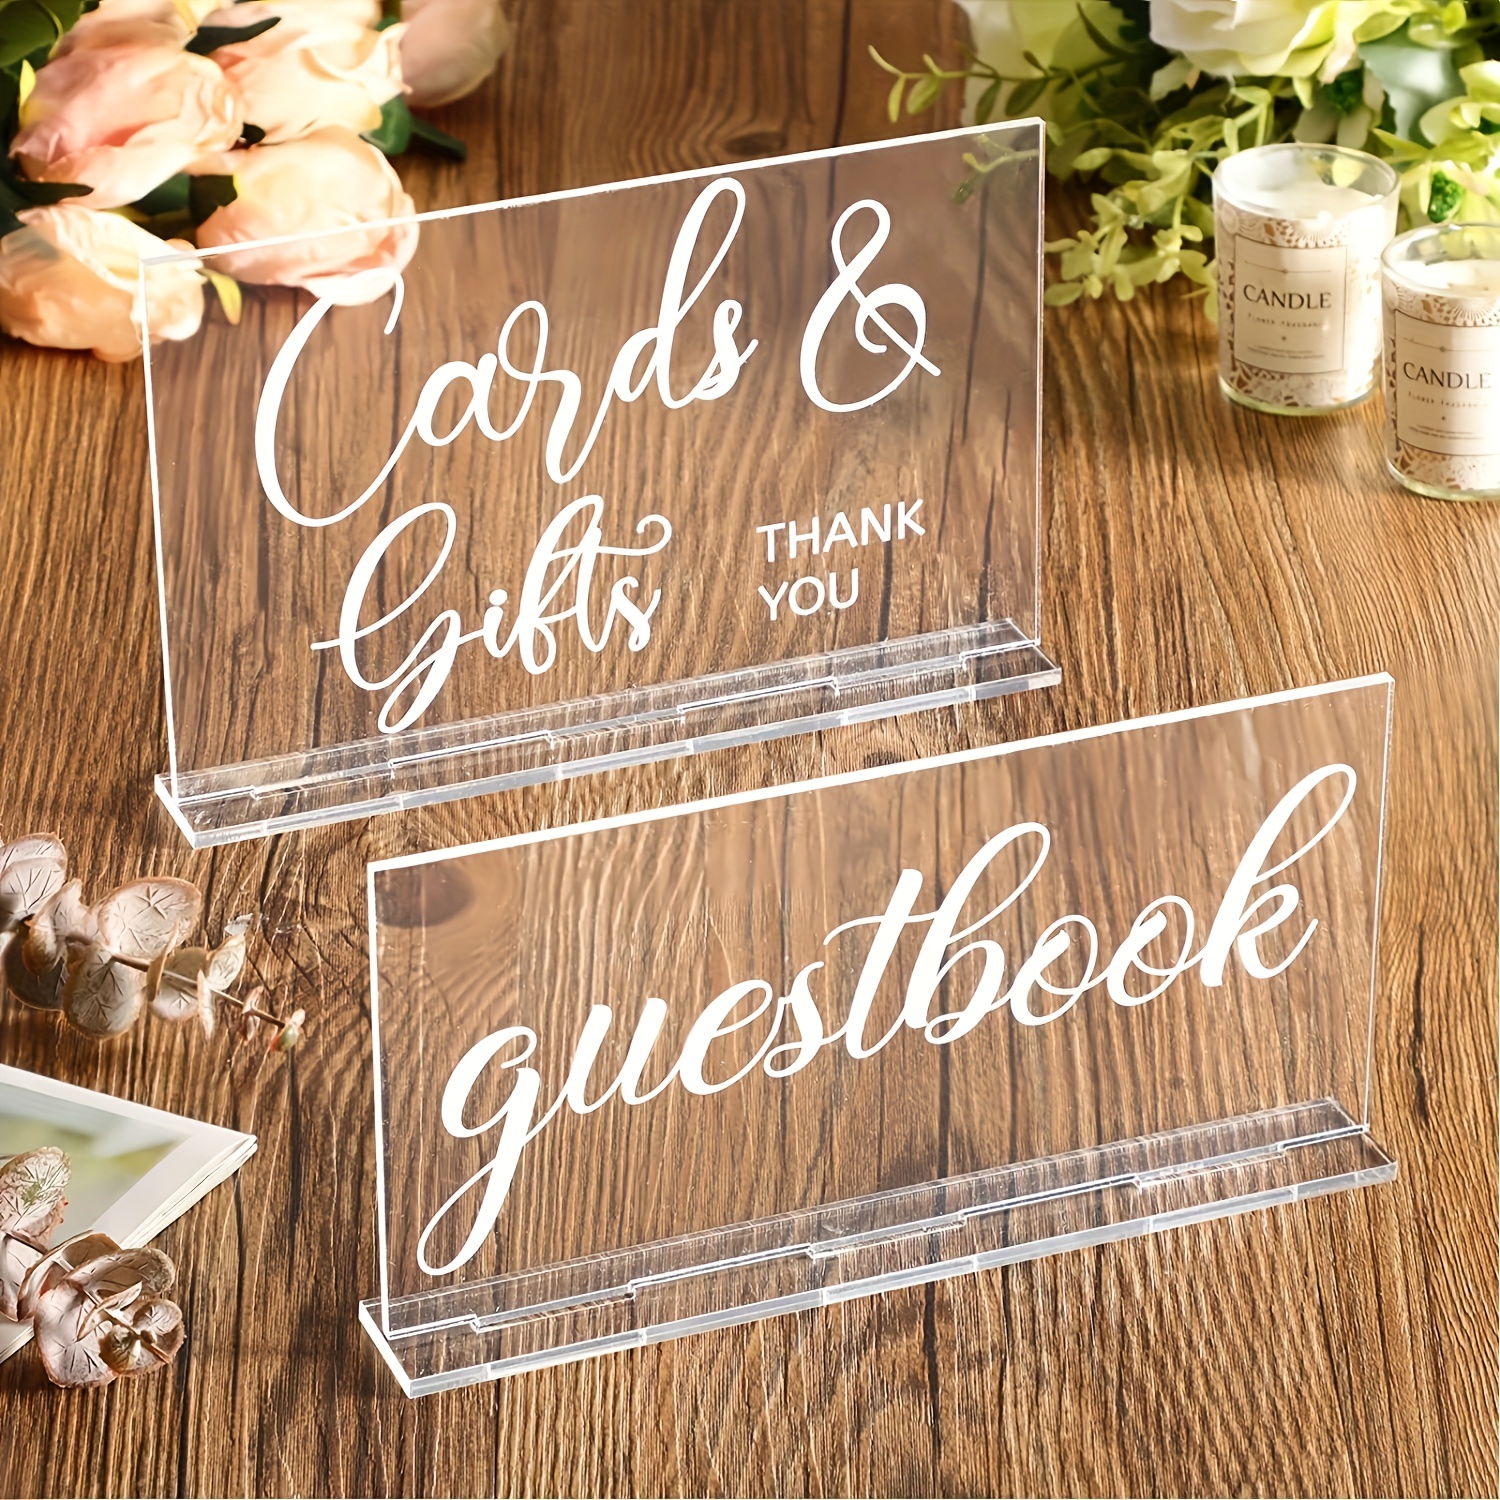 

2pcs, Acrylic Favors Sign Acrylic Wedding Reception Sign Guest Book Sign Cards, Stand Rustic Farmhouse Hanging, Cabin Beach Party Home Decor, 2 Styles (white Printing), Wedding Decor, Wedding Supplies